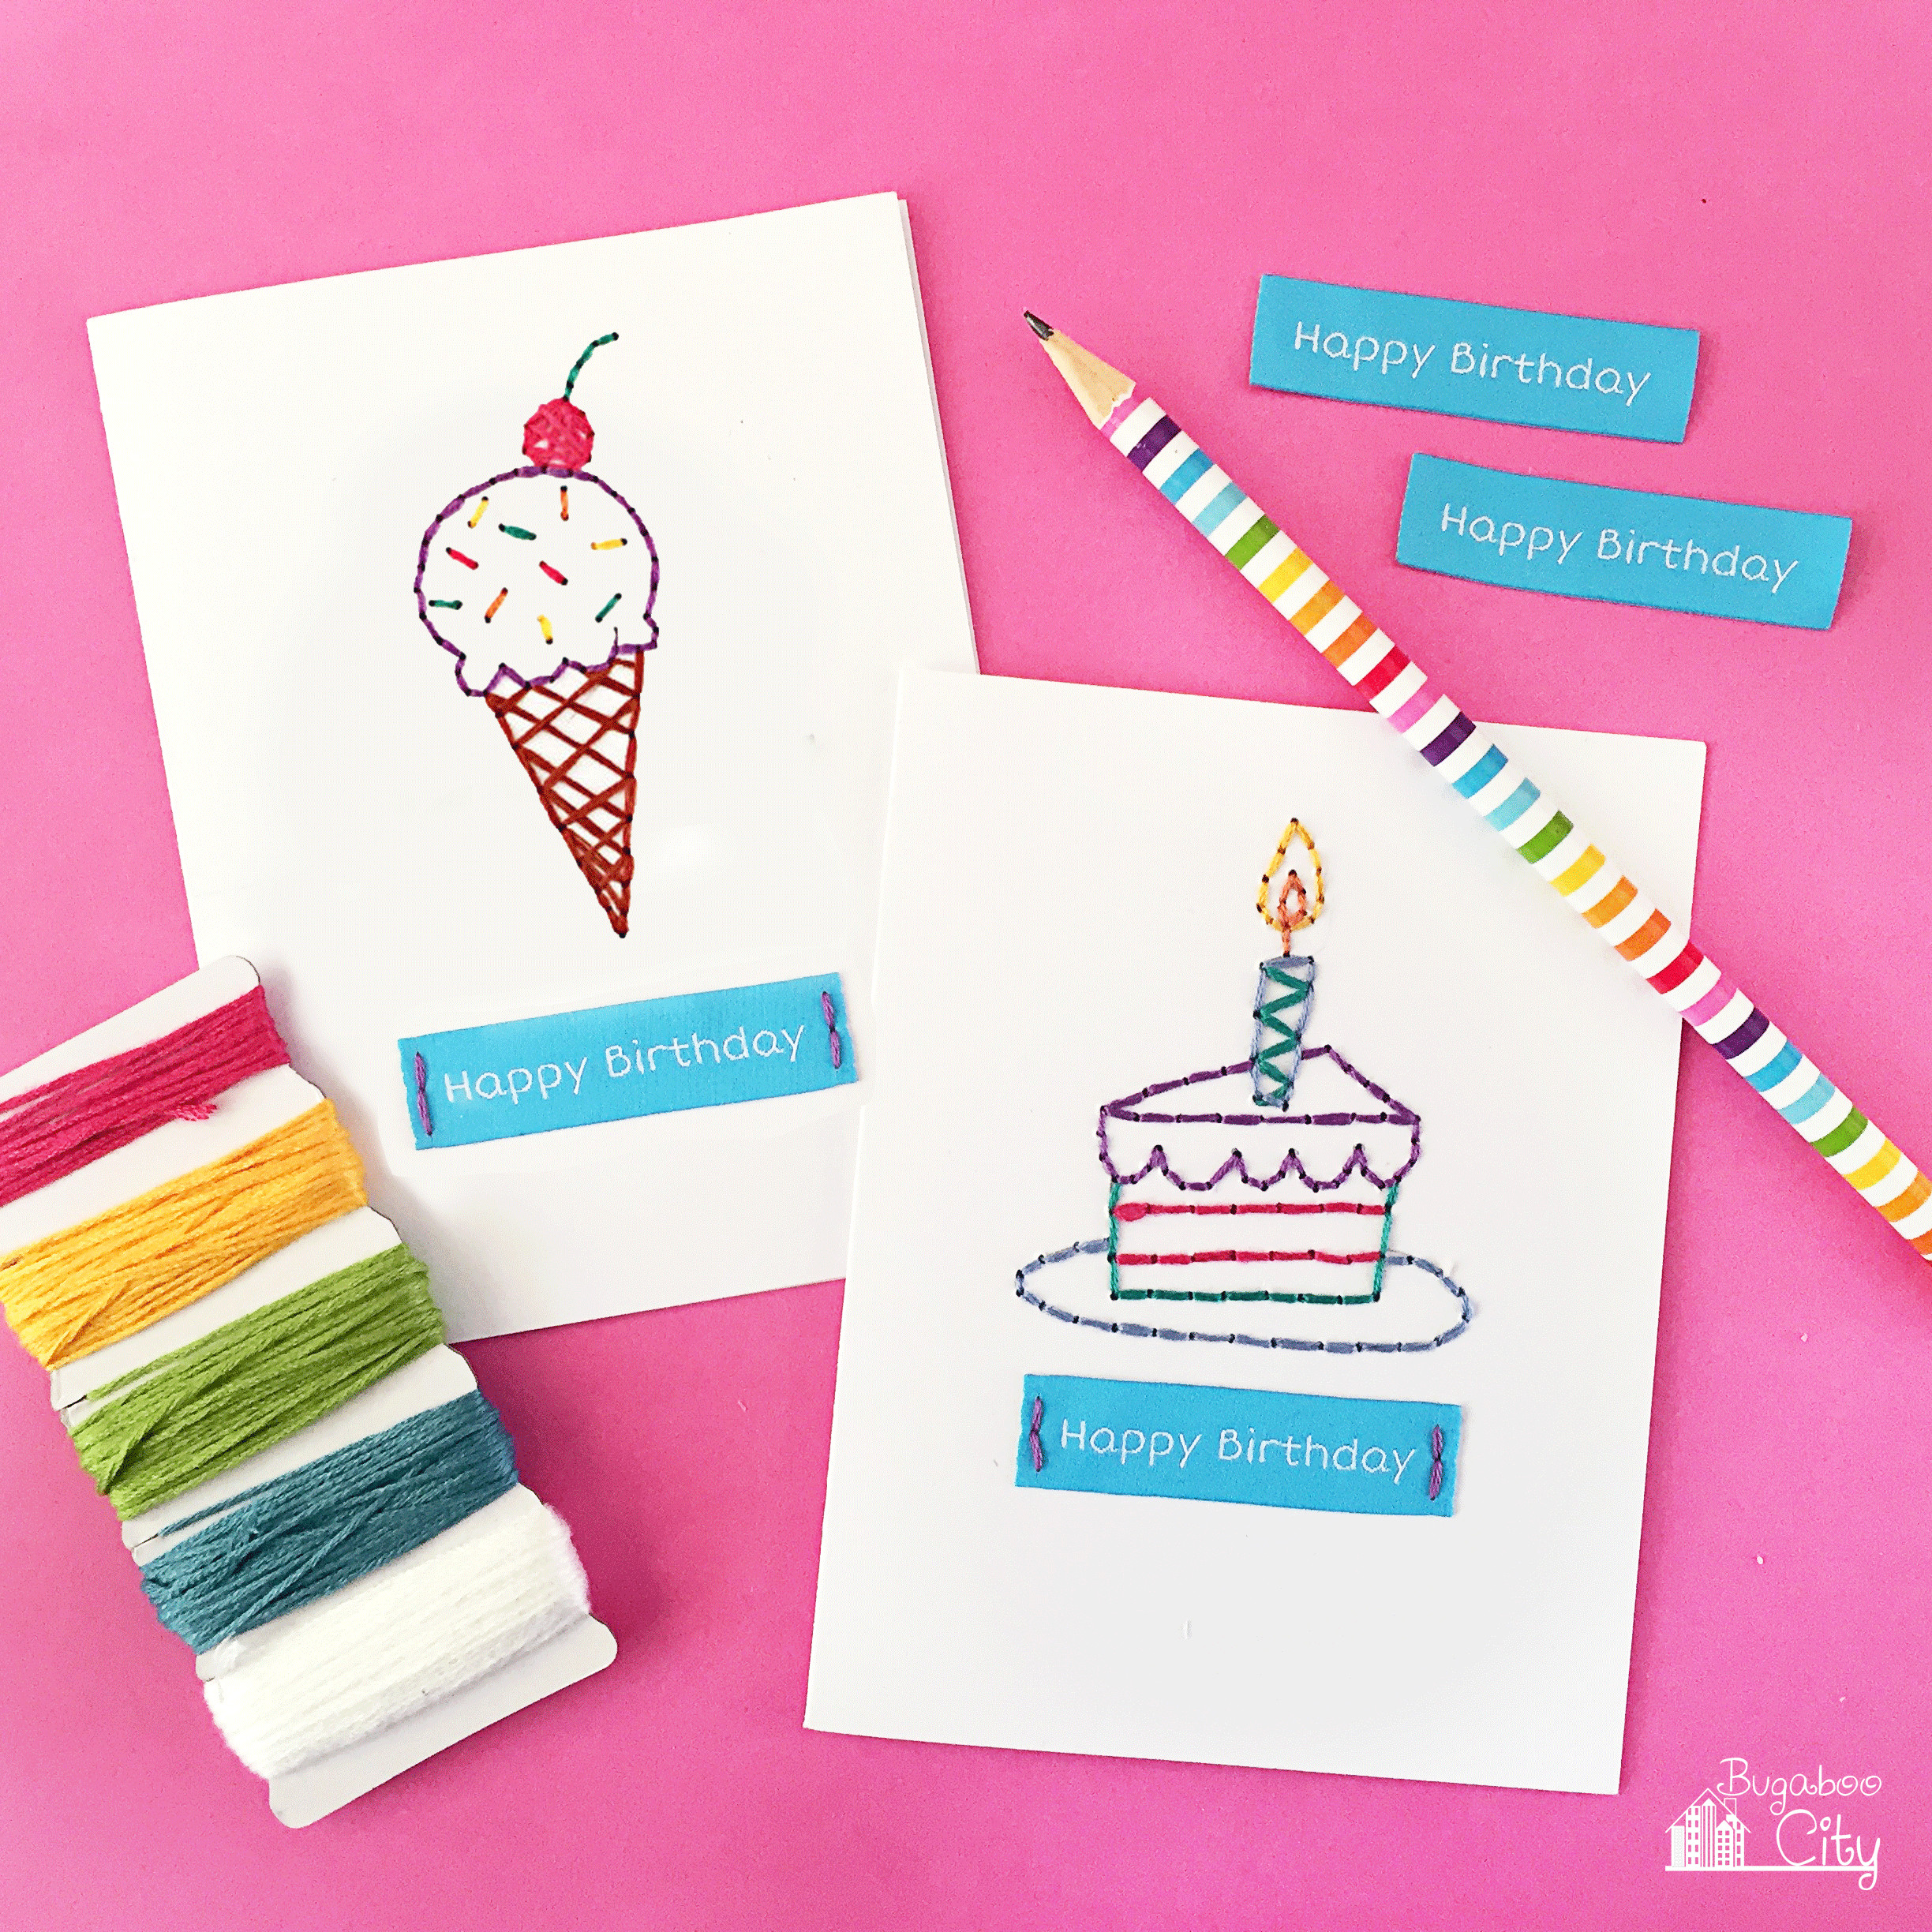 Cute Homemade Birthday Cards
 DIY Embroidered Cards BugabooCity